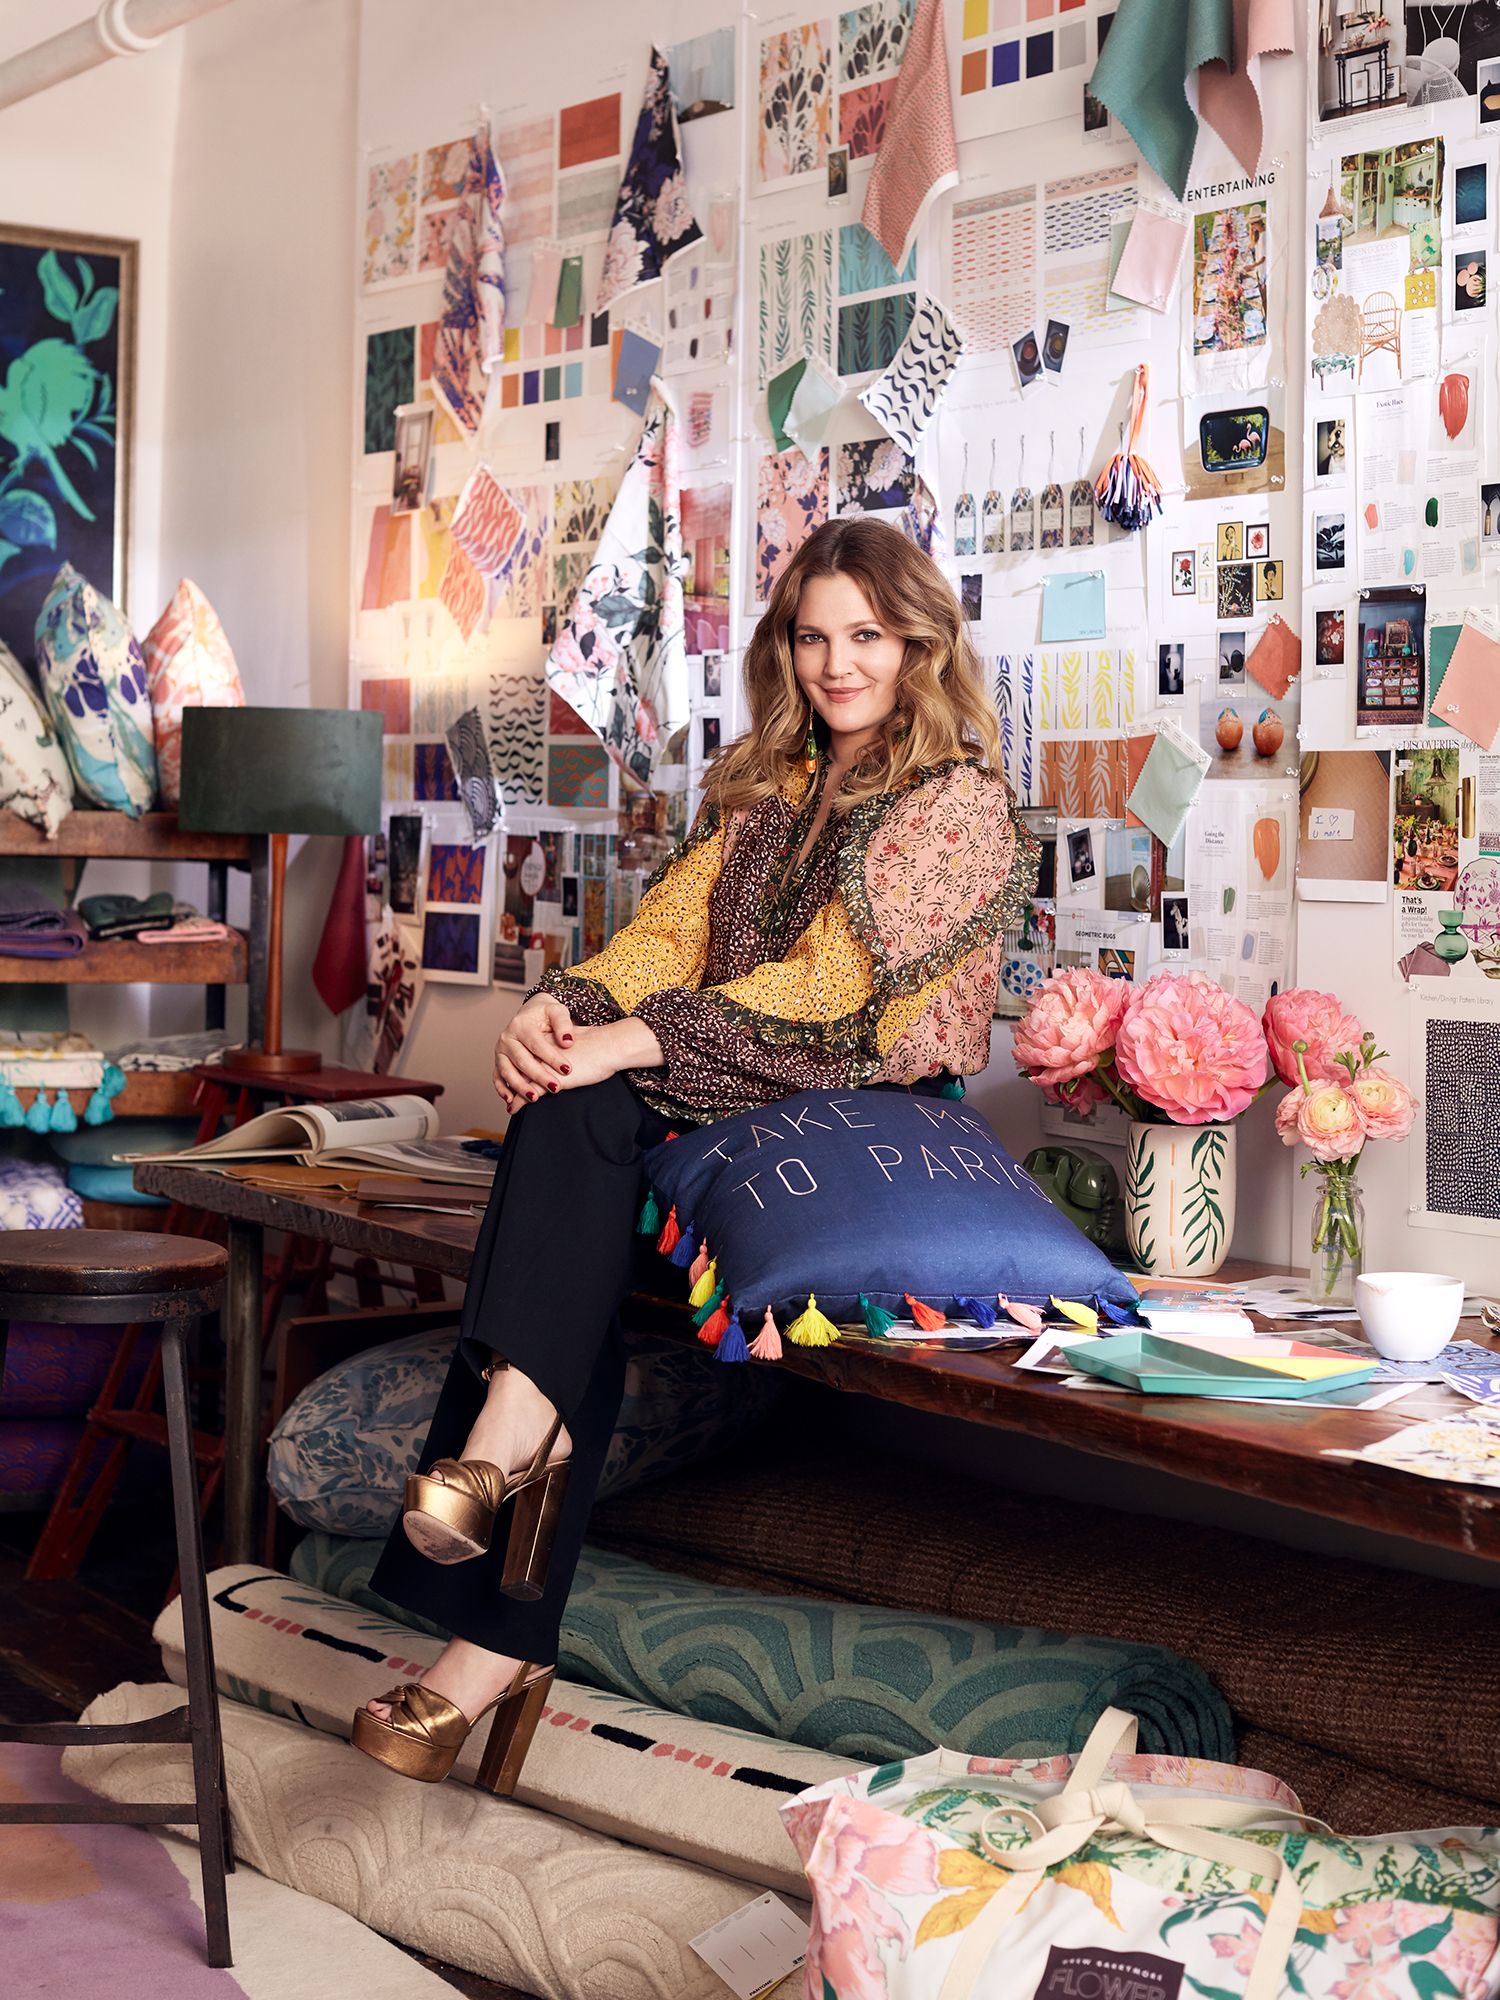 Why Women Everywhere Love Decorating With Drew Barrymore's Flower Home